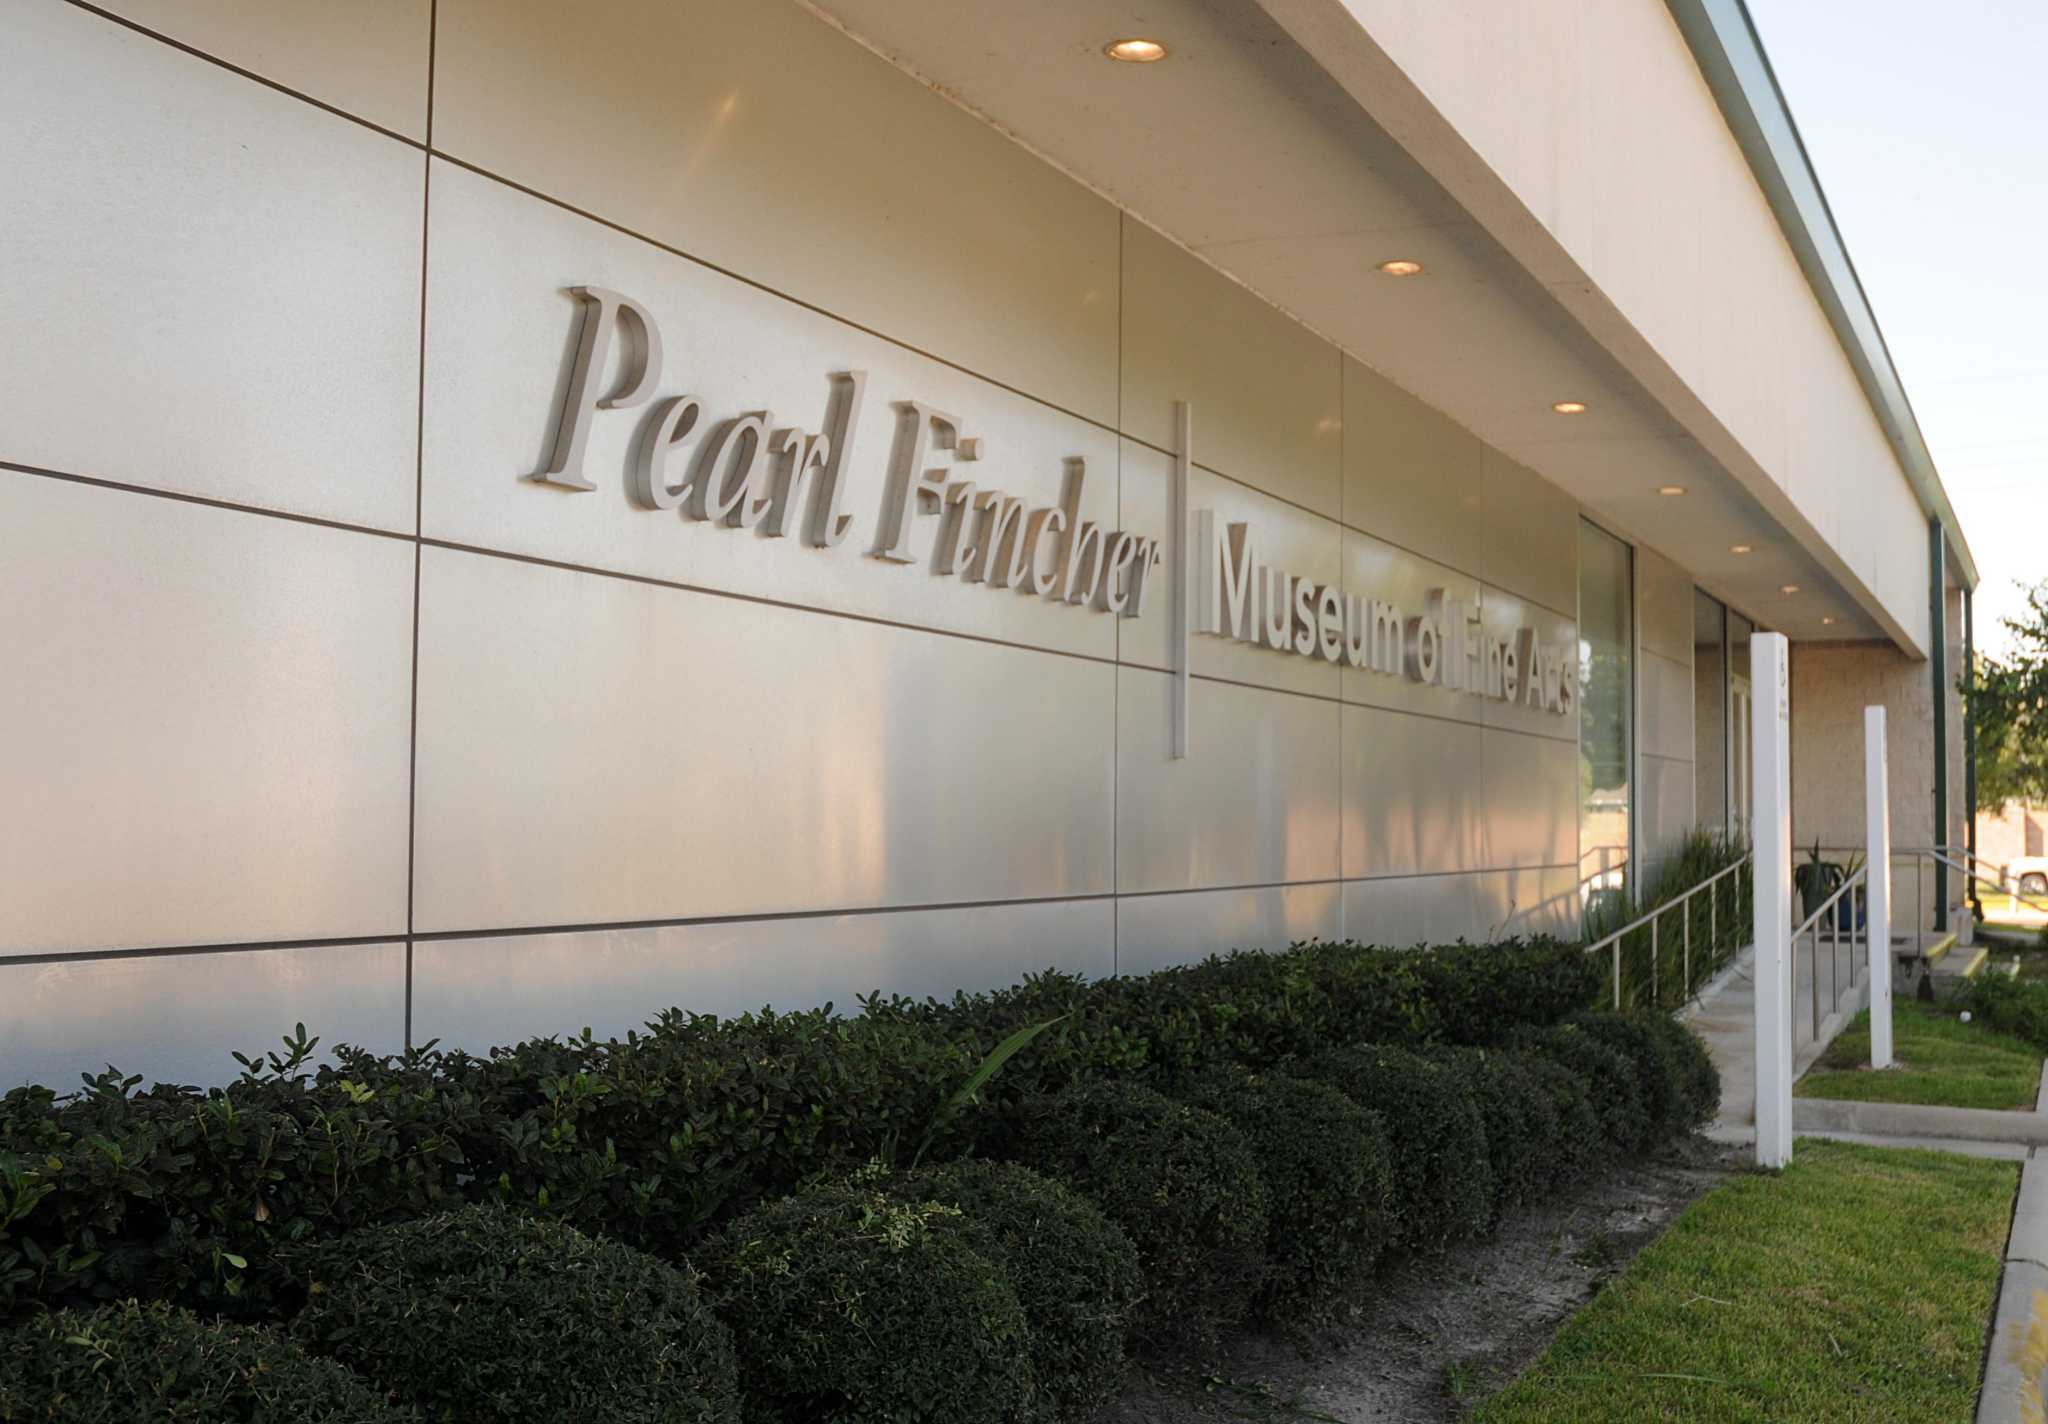 Pearl S. Fincher Museum of Fine Arts to reopen in